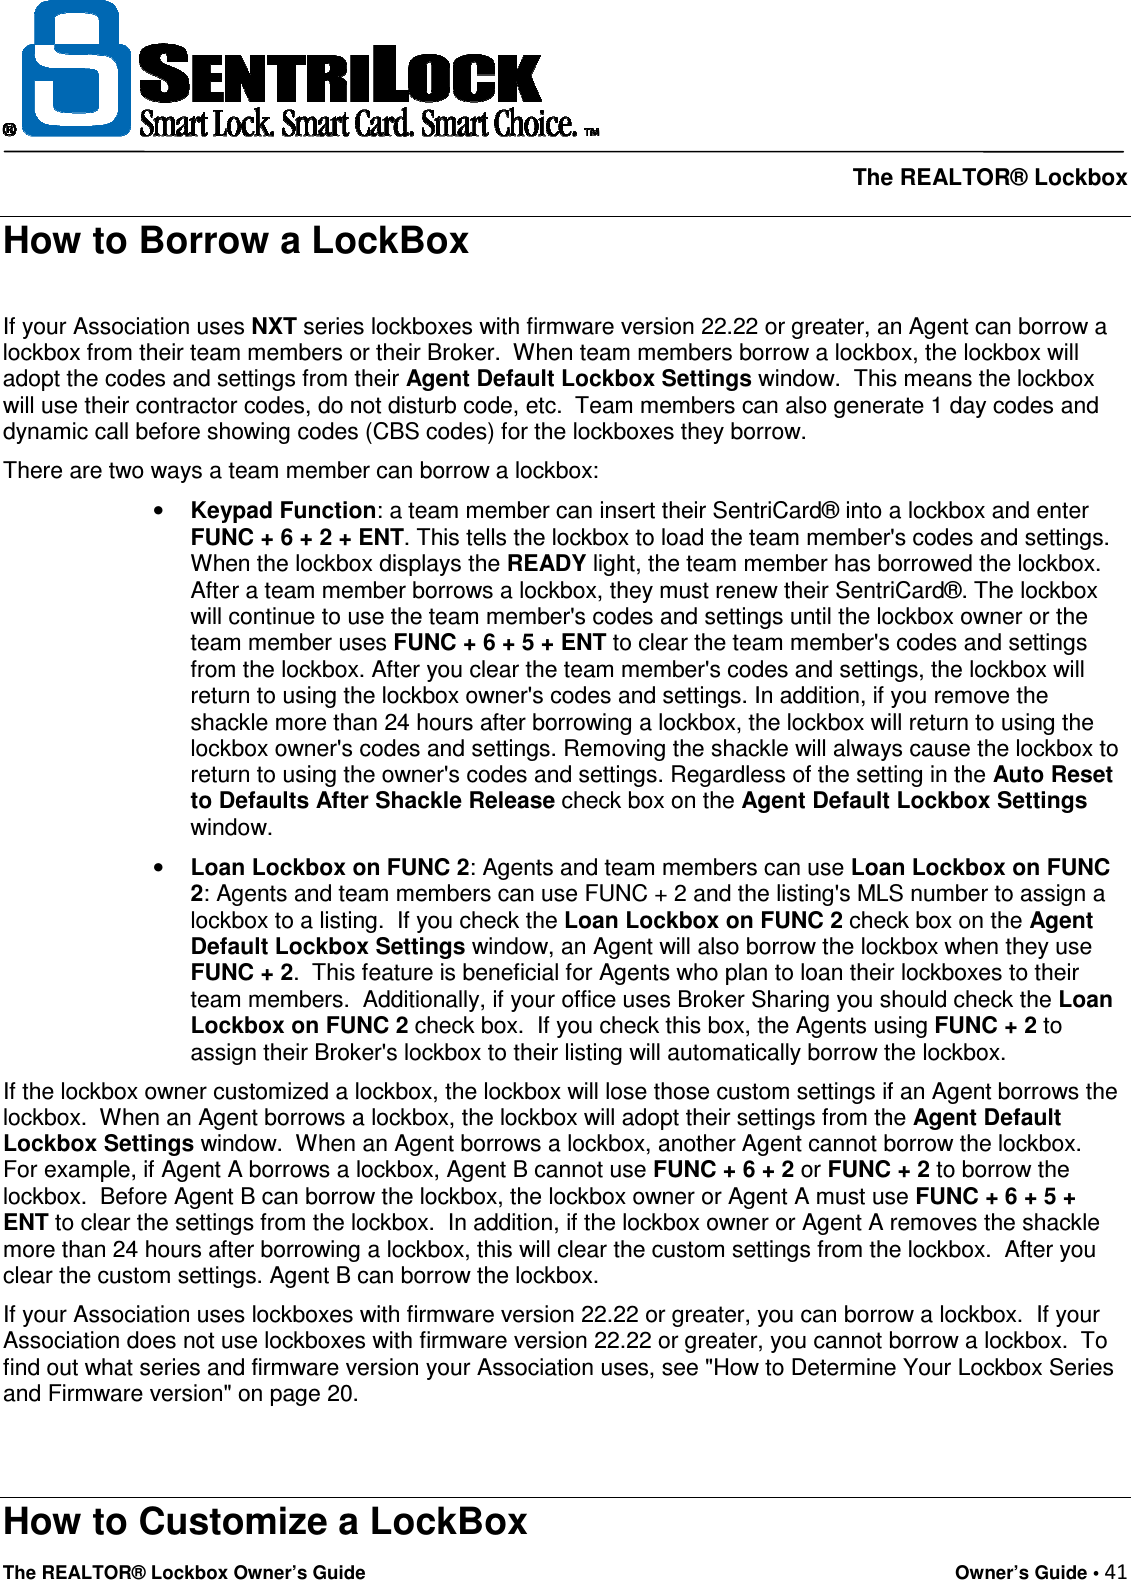     The REALTOR® Lockbox The REALTOR® Lockbox Owner’s Guide    Owner’s Guide • 41  How to Borrow a LockBox  If your Association uses NXT series lockboxes with firmware version 22.22 or greater, an Agent can borrow a lockbox from their team members or their Broker.  When team members borrow a lockbox, the lockbox will adopt the codes and settings from their Agent Default Lockbox Settings window.  This means the lockbox will use their contractor codes, do not disturb code, etc.  Team members can also generate 1 day codes and dynamic call before showing codes (CBS codes) for the lockboxes they borrow.  There are two ways a team member can borrow a lockbox:  • Keypad Function: a team member can insert their SentriCard® into a lockbox and enter FUNC + 6 + 2 + ENT. This tells the lockbox to load the team member&apos;s codes and settings. When the lockbox displays the READY light, the team member has borrowed the lockbox. After a team member borrows a lockbox, they must renew their SentriCard®. The lockbox will continue to use the team member&apos;s codes and settings until the lockbox owner or the team member uses FUNC + 6 + 5 + ENT to clear the team member&apos;s codes and settings from the lockbox. After you clear the team member&apos;s codes and settings, the lockbox will return to using the lockbox owner&apos;s codes and settings. In addition, if you remove the shackle more than 24 hours after borrowing a lockbox, the lockbox will return to using the lockbox owner&apos;s codes and settings. Removing the shackle will always cause the lockbox to return to using the owner&apos;s codes and settings. Regardless of the setting in the Auto Reset to Defaults After Shackle Release check box on the Agent Default Lockbox Settings window.  • Loan Lockbox on FUNC 2: Agents and team members can use Loan Lockbox on FUNC 2: Agents and team members can use FUNC + 2 and the listing&apos;s MLS number to assign a lockbox to a listing.  If you check the Loan Lockbox on FUNC 2 check box on the Agent Default Lockbox Settings window, an Agent will also borrow the lockbox when they use FUNC + 2.  This feature is beneficial for Agents who plan to loan their lockboxes to their team members.  Additionally, if your office uses Broker Sharing you should check the Loan Lockbox on FUNC 2 check box.  If you check this box, the Agents using FUNC + 2 to assign their Broker&apos;s lockbox to their listing will automatically borrow the lockbox.  If the lockbox owner customized a lockbox, the lockbox will lose those custom settings if an Agent borrows the lockbox.  When an Agent borrows a lockbox, the lockbox will adopt their settings from the Agent Default Lockbox Settings window.  When an Agent borrows a lockbox, another Agent cannot borrow the lockbox.  For example, if Agent A borrows a lockbox, Agent B cannot use FUNC + 6 + 2 or FUNC + 2 to borrow the lockbox.  Before Agent B can borrow the lockbox, the lockbox owner or Agent A must use FUNC + 6 + 5 + ENT to clear the settings from the lockbox.  In addition, if the lockbox owner or Agent A removes the shackle more than 24 hours after borrowing a lockbox, this will clear the custom settings from the lockbox.  After you clear the custom settings. Agent B can borrow the lockbox.  If your Association uses lockboxes with firmware version 22.22 or greater, you can borrow a lockbox.  If your Association does not use lockboxes with firmware version 22.22 or greater, you cannot borrow a lockbox.  To find out what series and firmware version your Association uses, see &quot;How to Determine Your Lockbox Series and Firmware version&quot; on page 20.   How to Customize a LockBox 